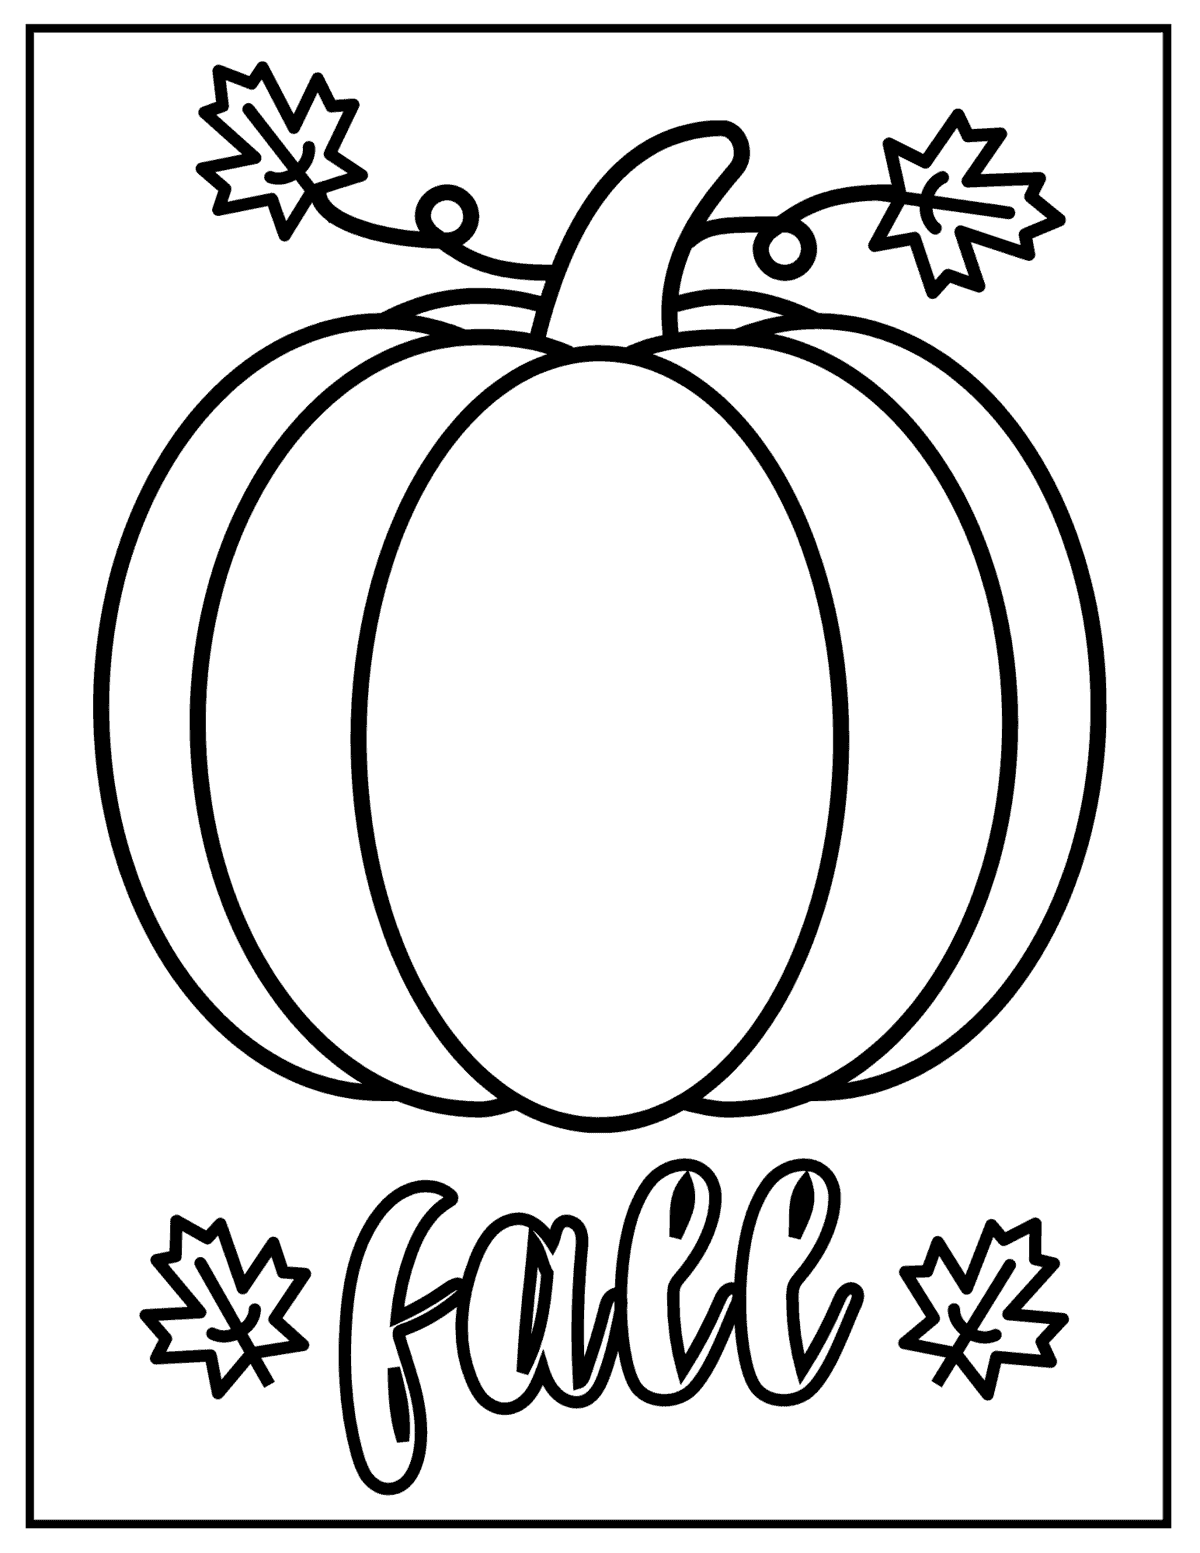 easy fall coloring pages to print